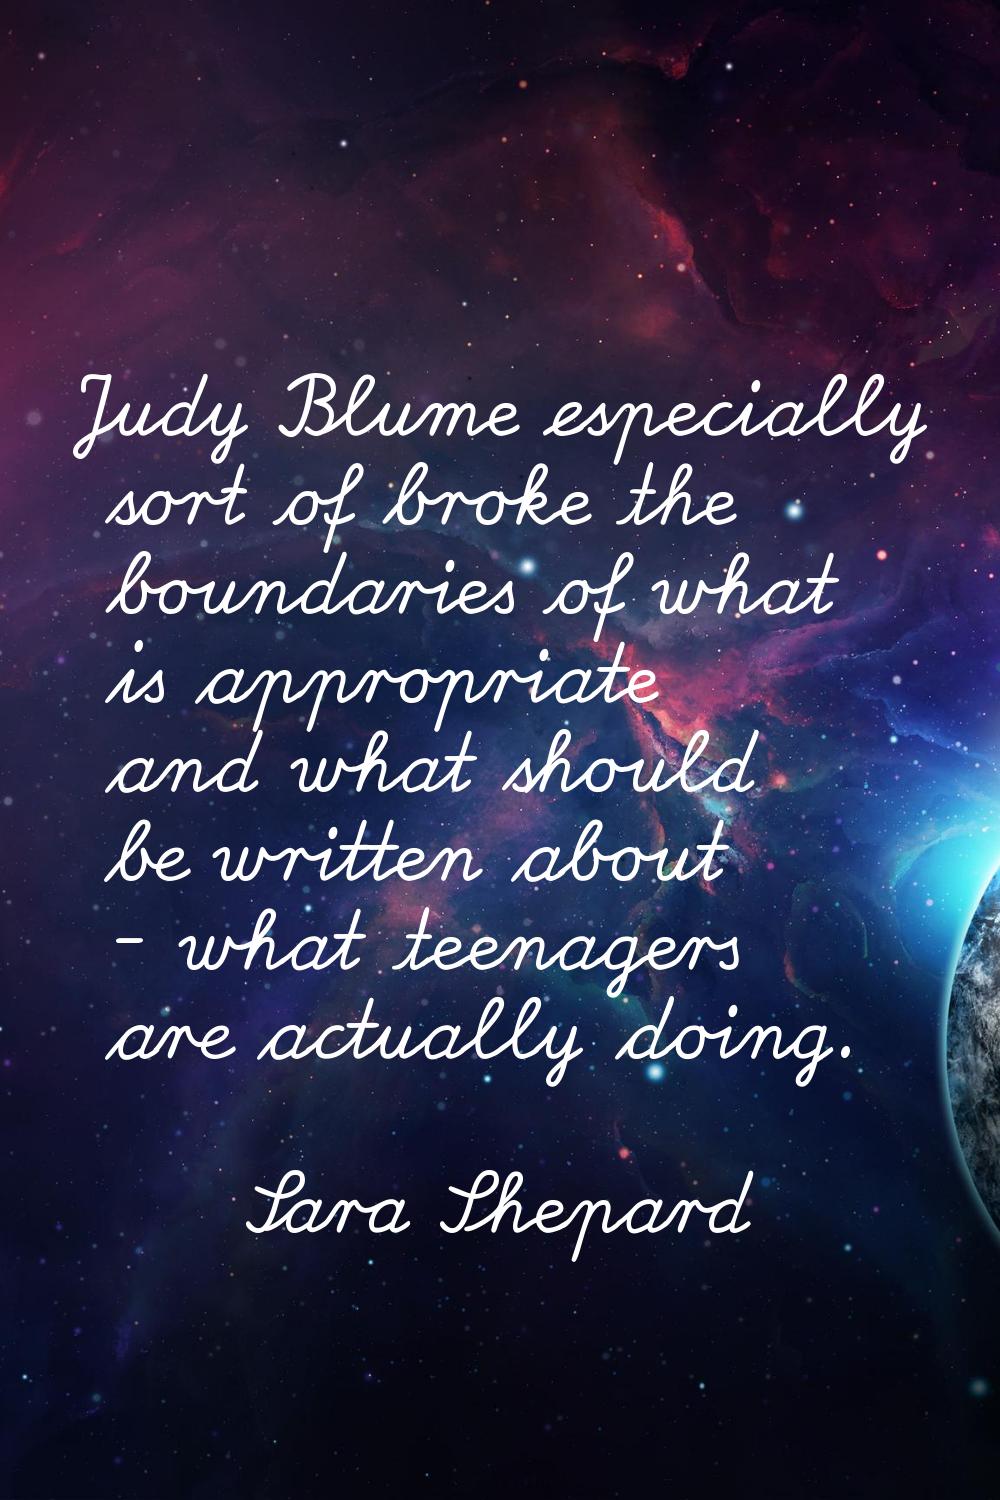 Judy Blume especially sort of broke the boundaries of what is appropriate and what should be writte